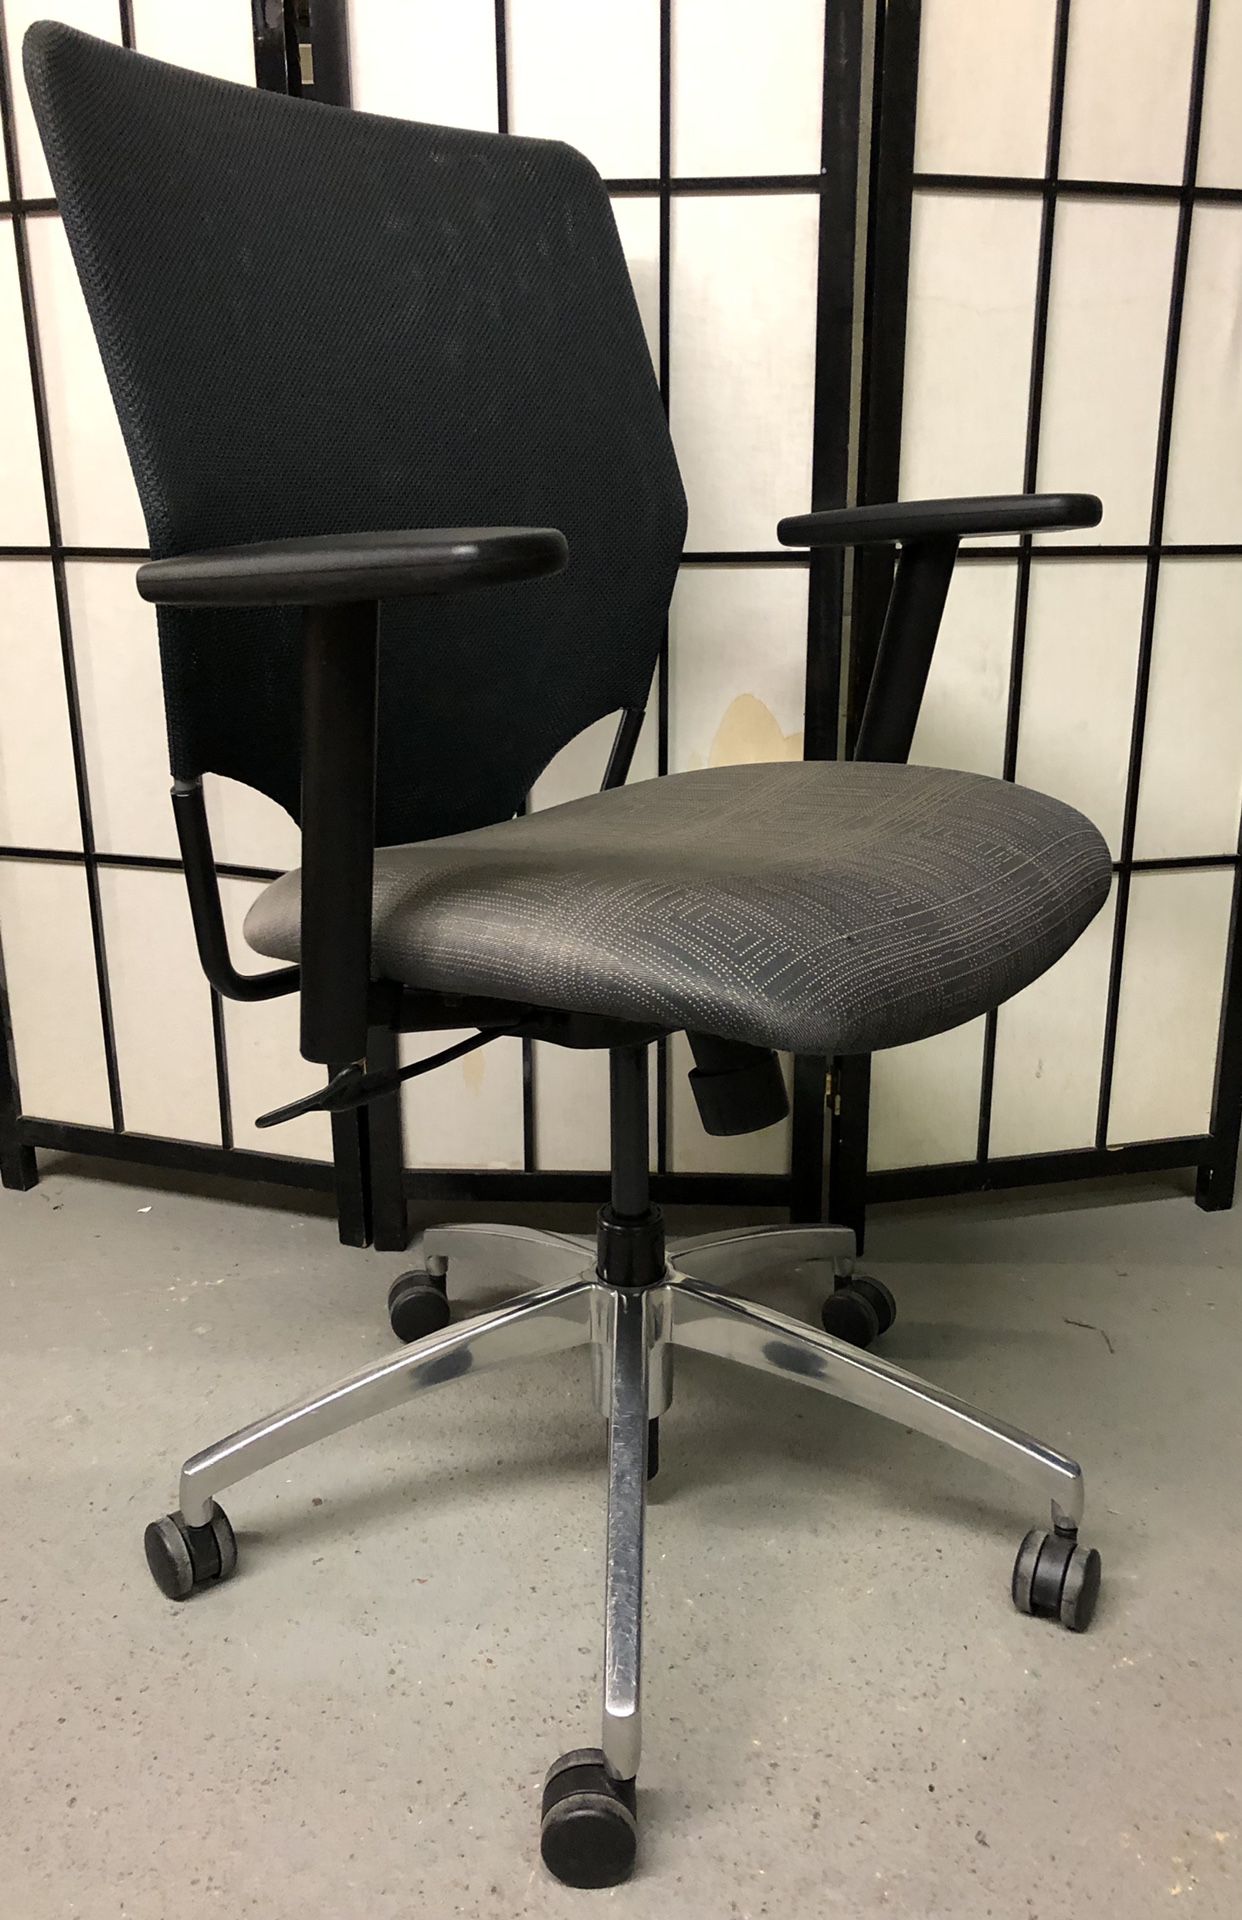 Harter Anthro  Office Desk Chair  2  Task Chairs $50 Each